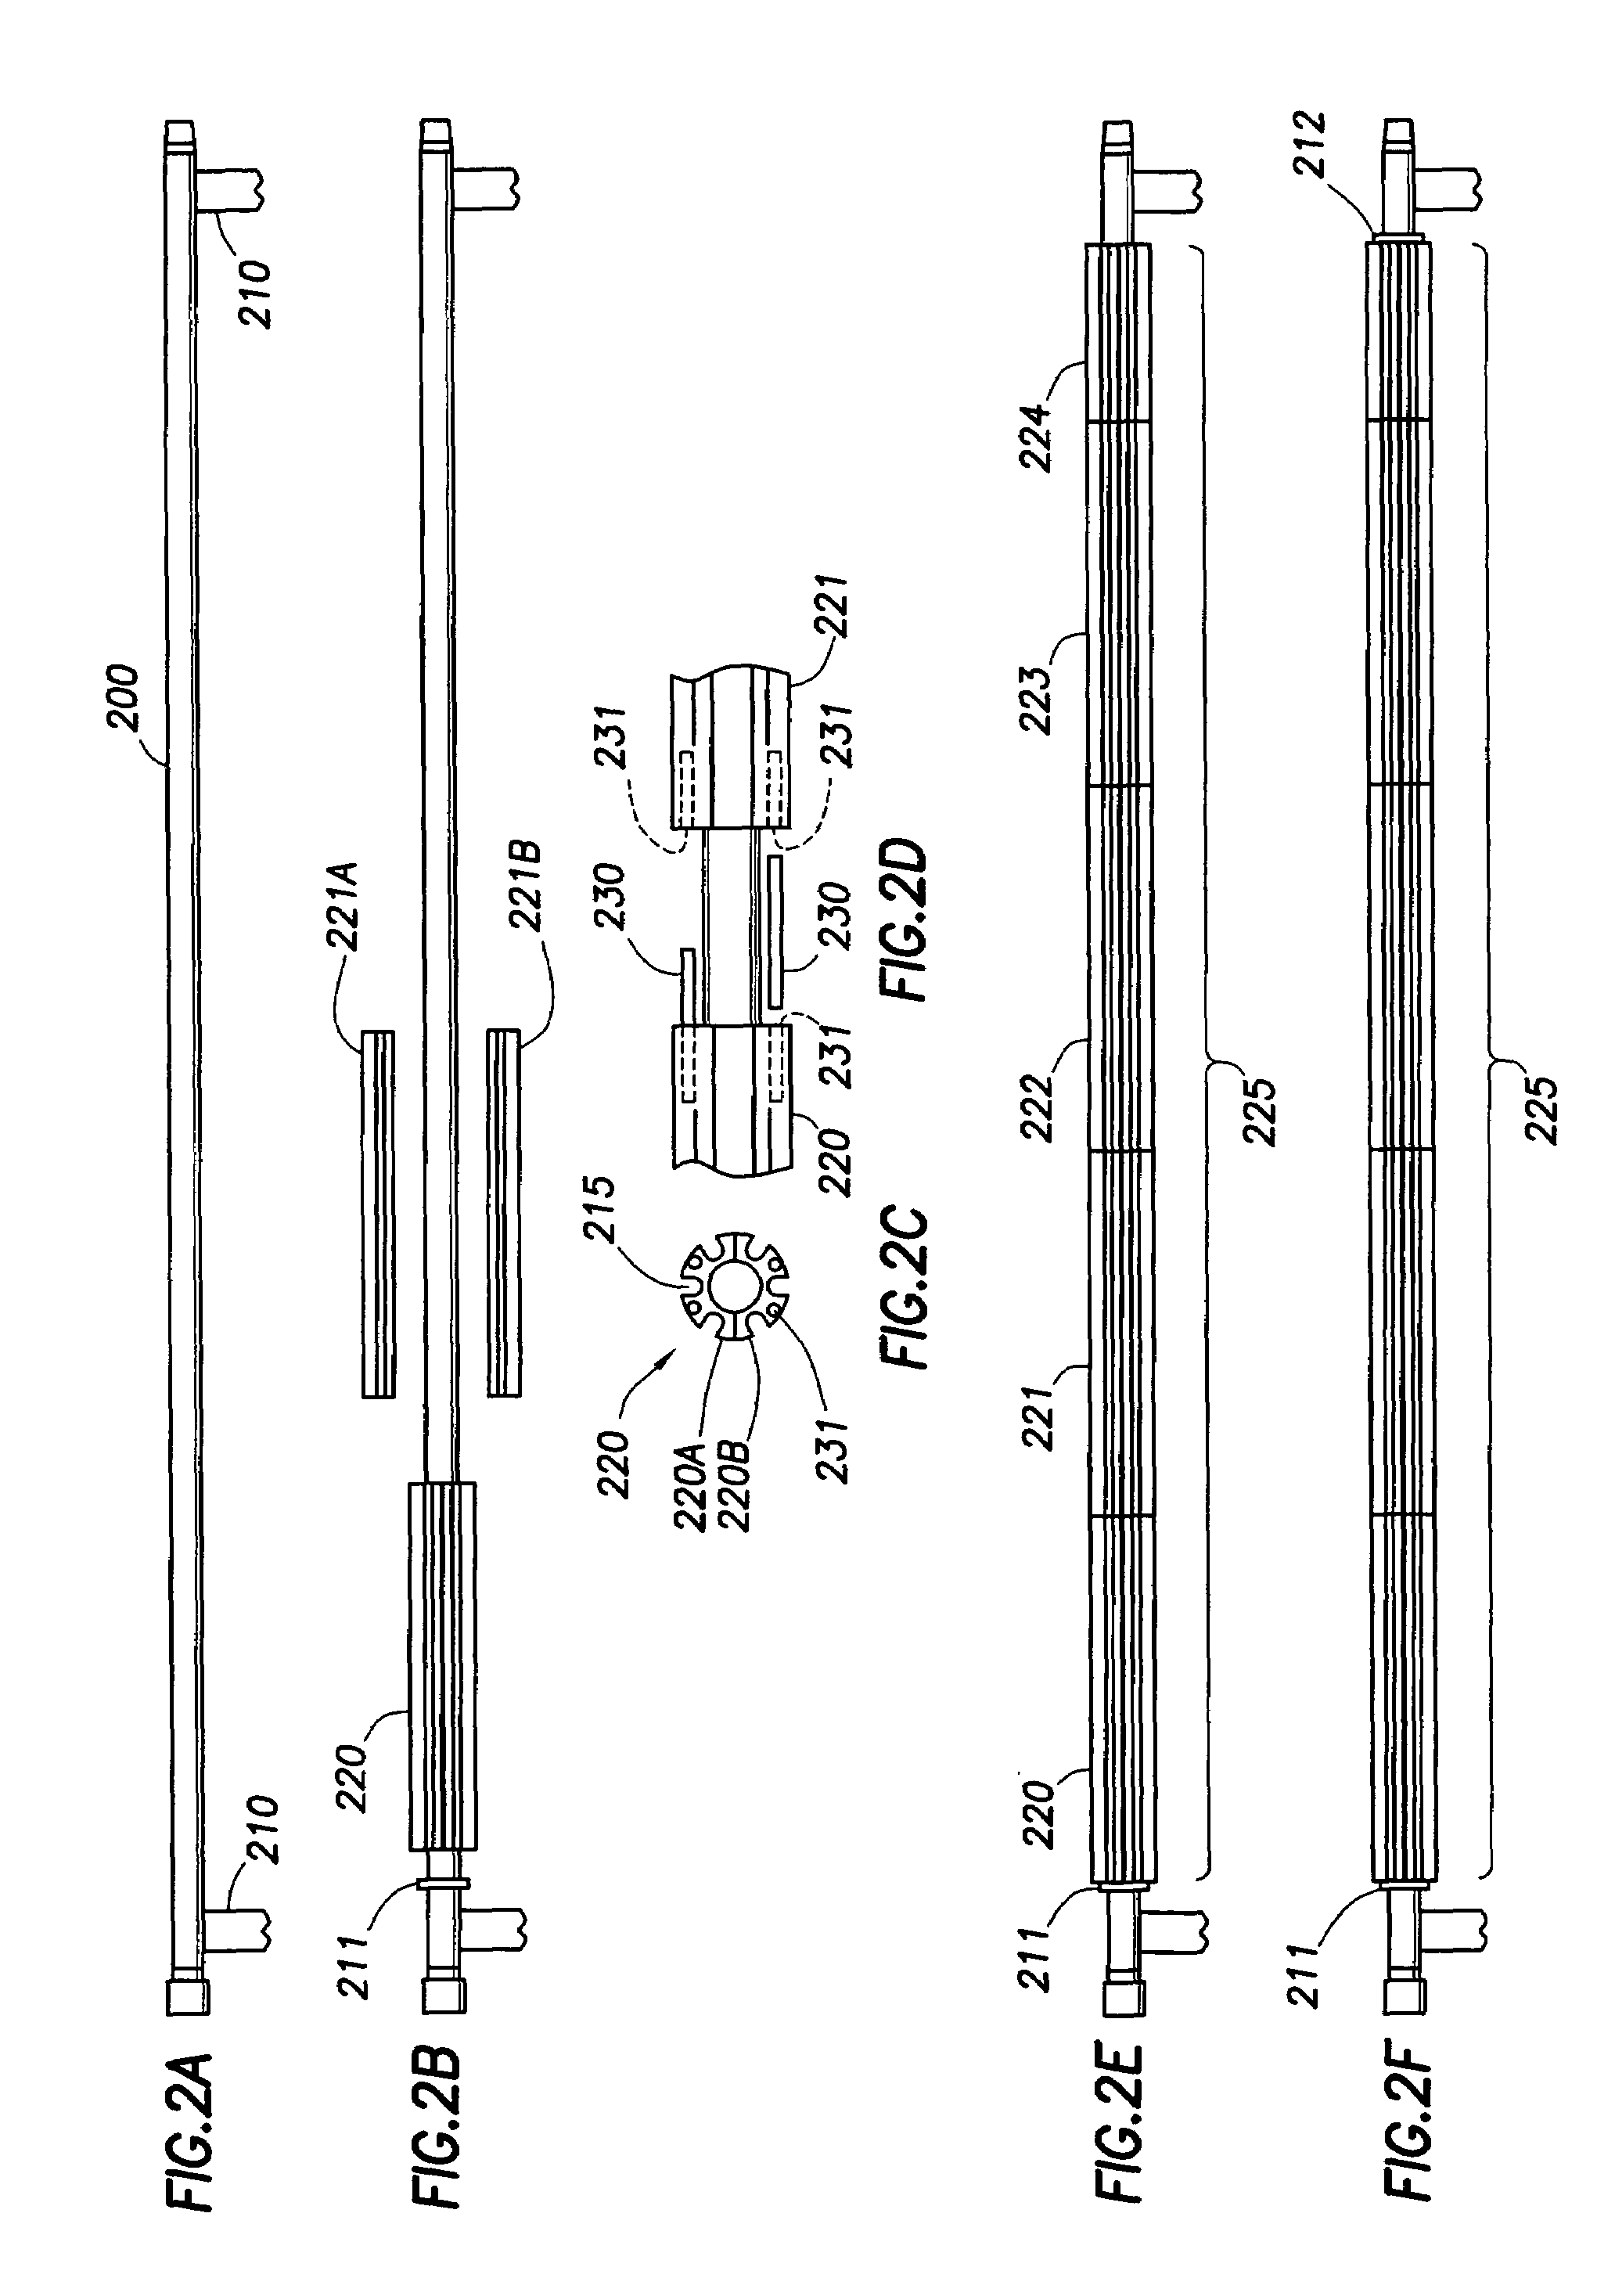 Apparatus and methods for providing VIV suppression to a riser system comprising umbilical elements